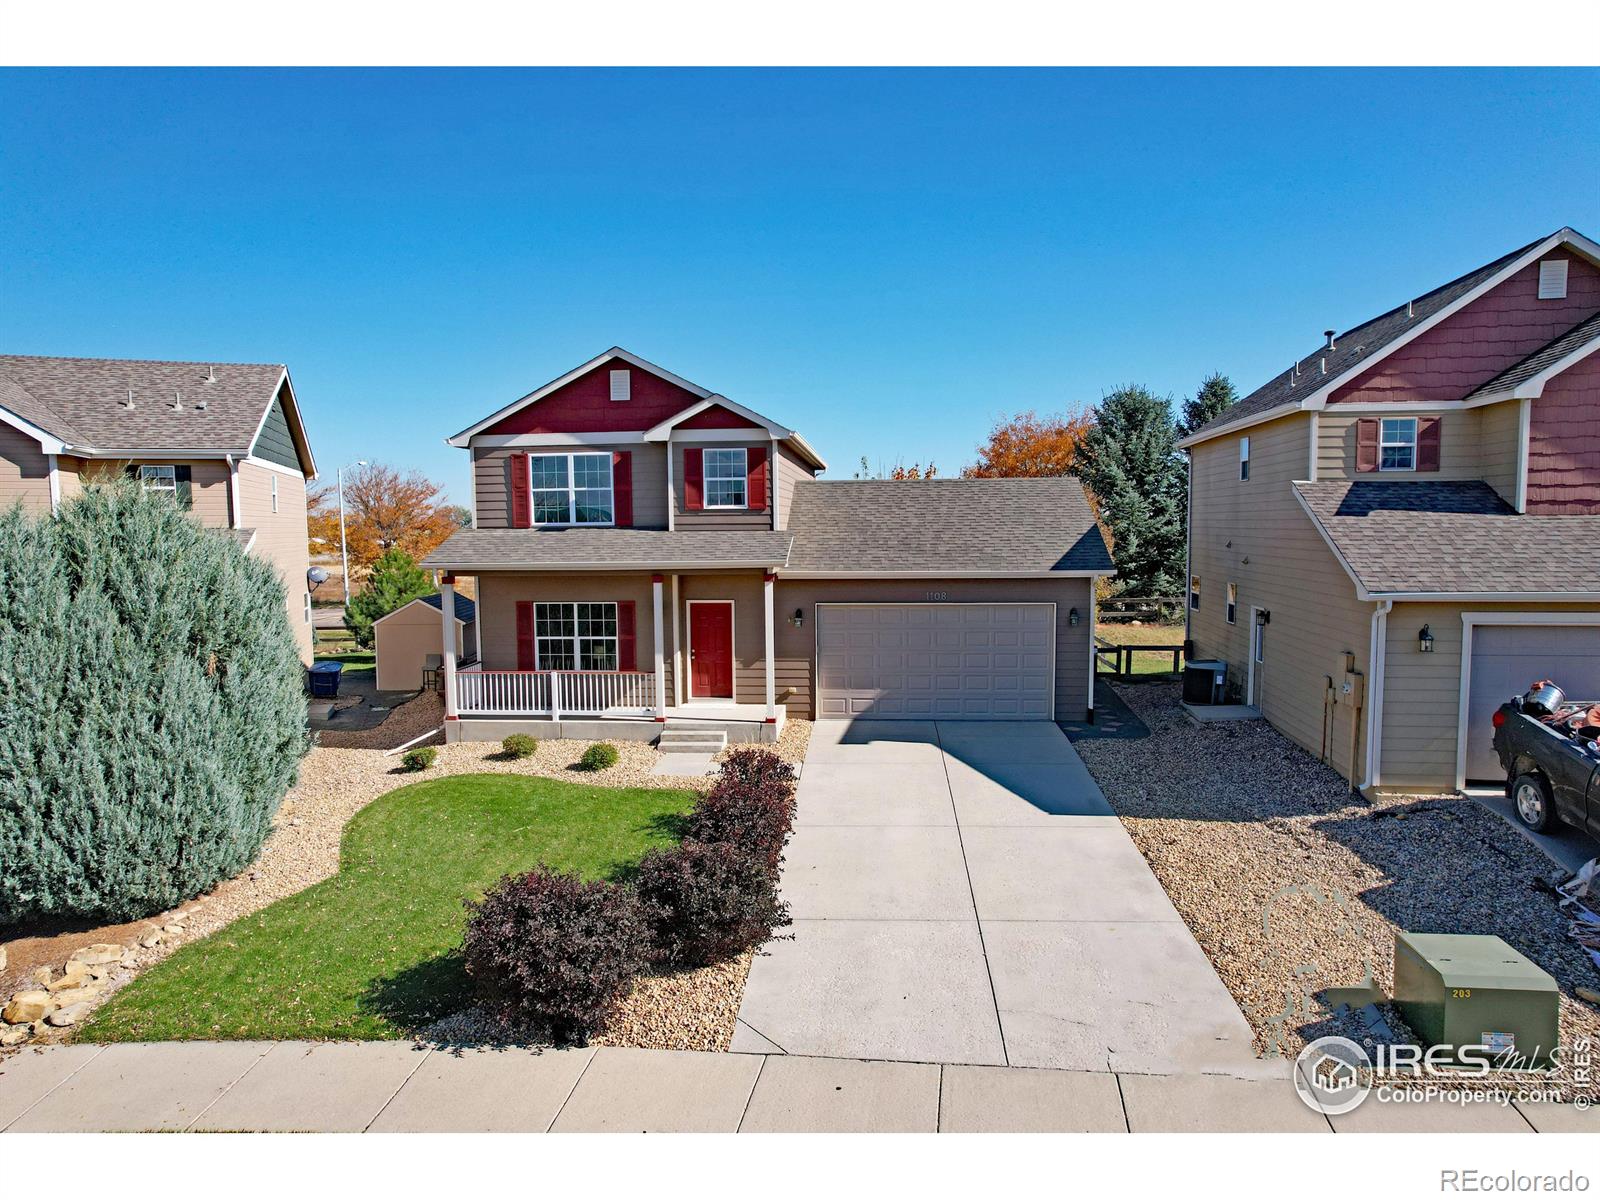 1108  101st Ave Ct, greeley MLS: 4567891004826 Beds: 4 Baths: 4 Price: $463,000